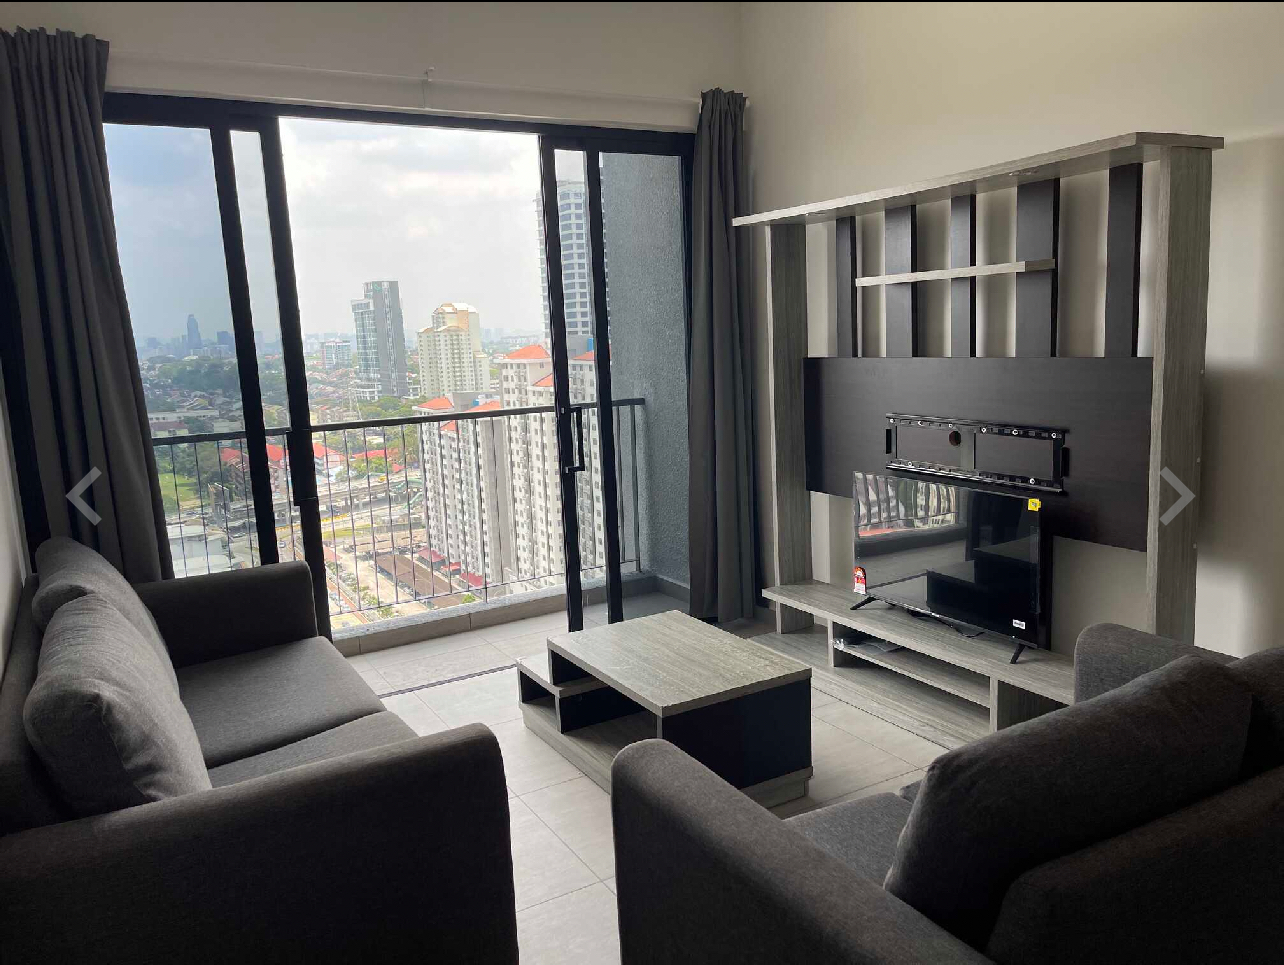 room for rent, studio, kampung pasir gudang baru, Send the owner a message on WhatsApp/facebook if you want to RENT the unit(Mohammed Nhat)&Telegram(@muhammednhat101)